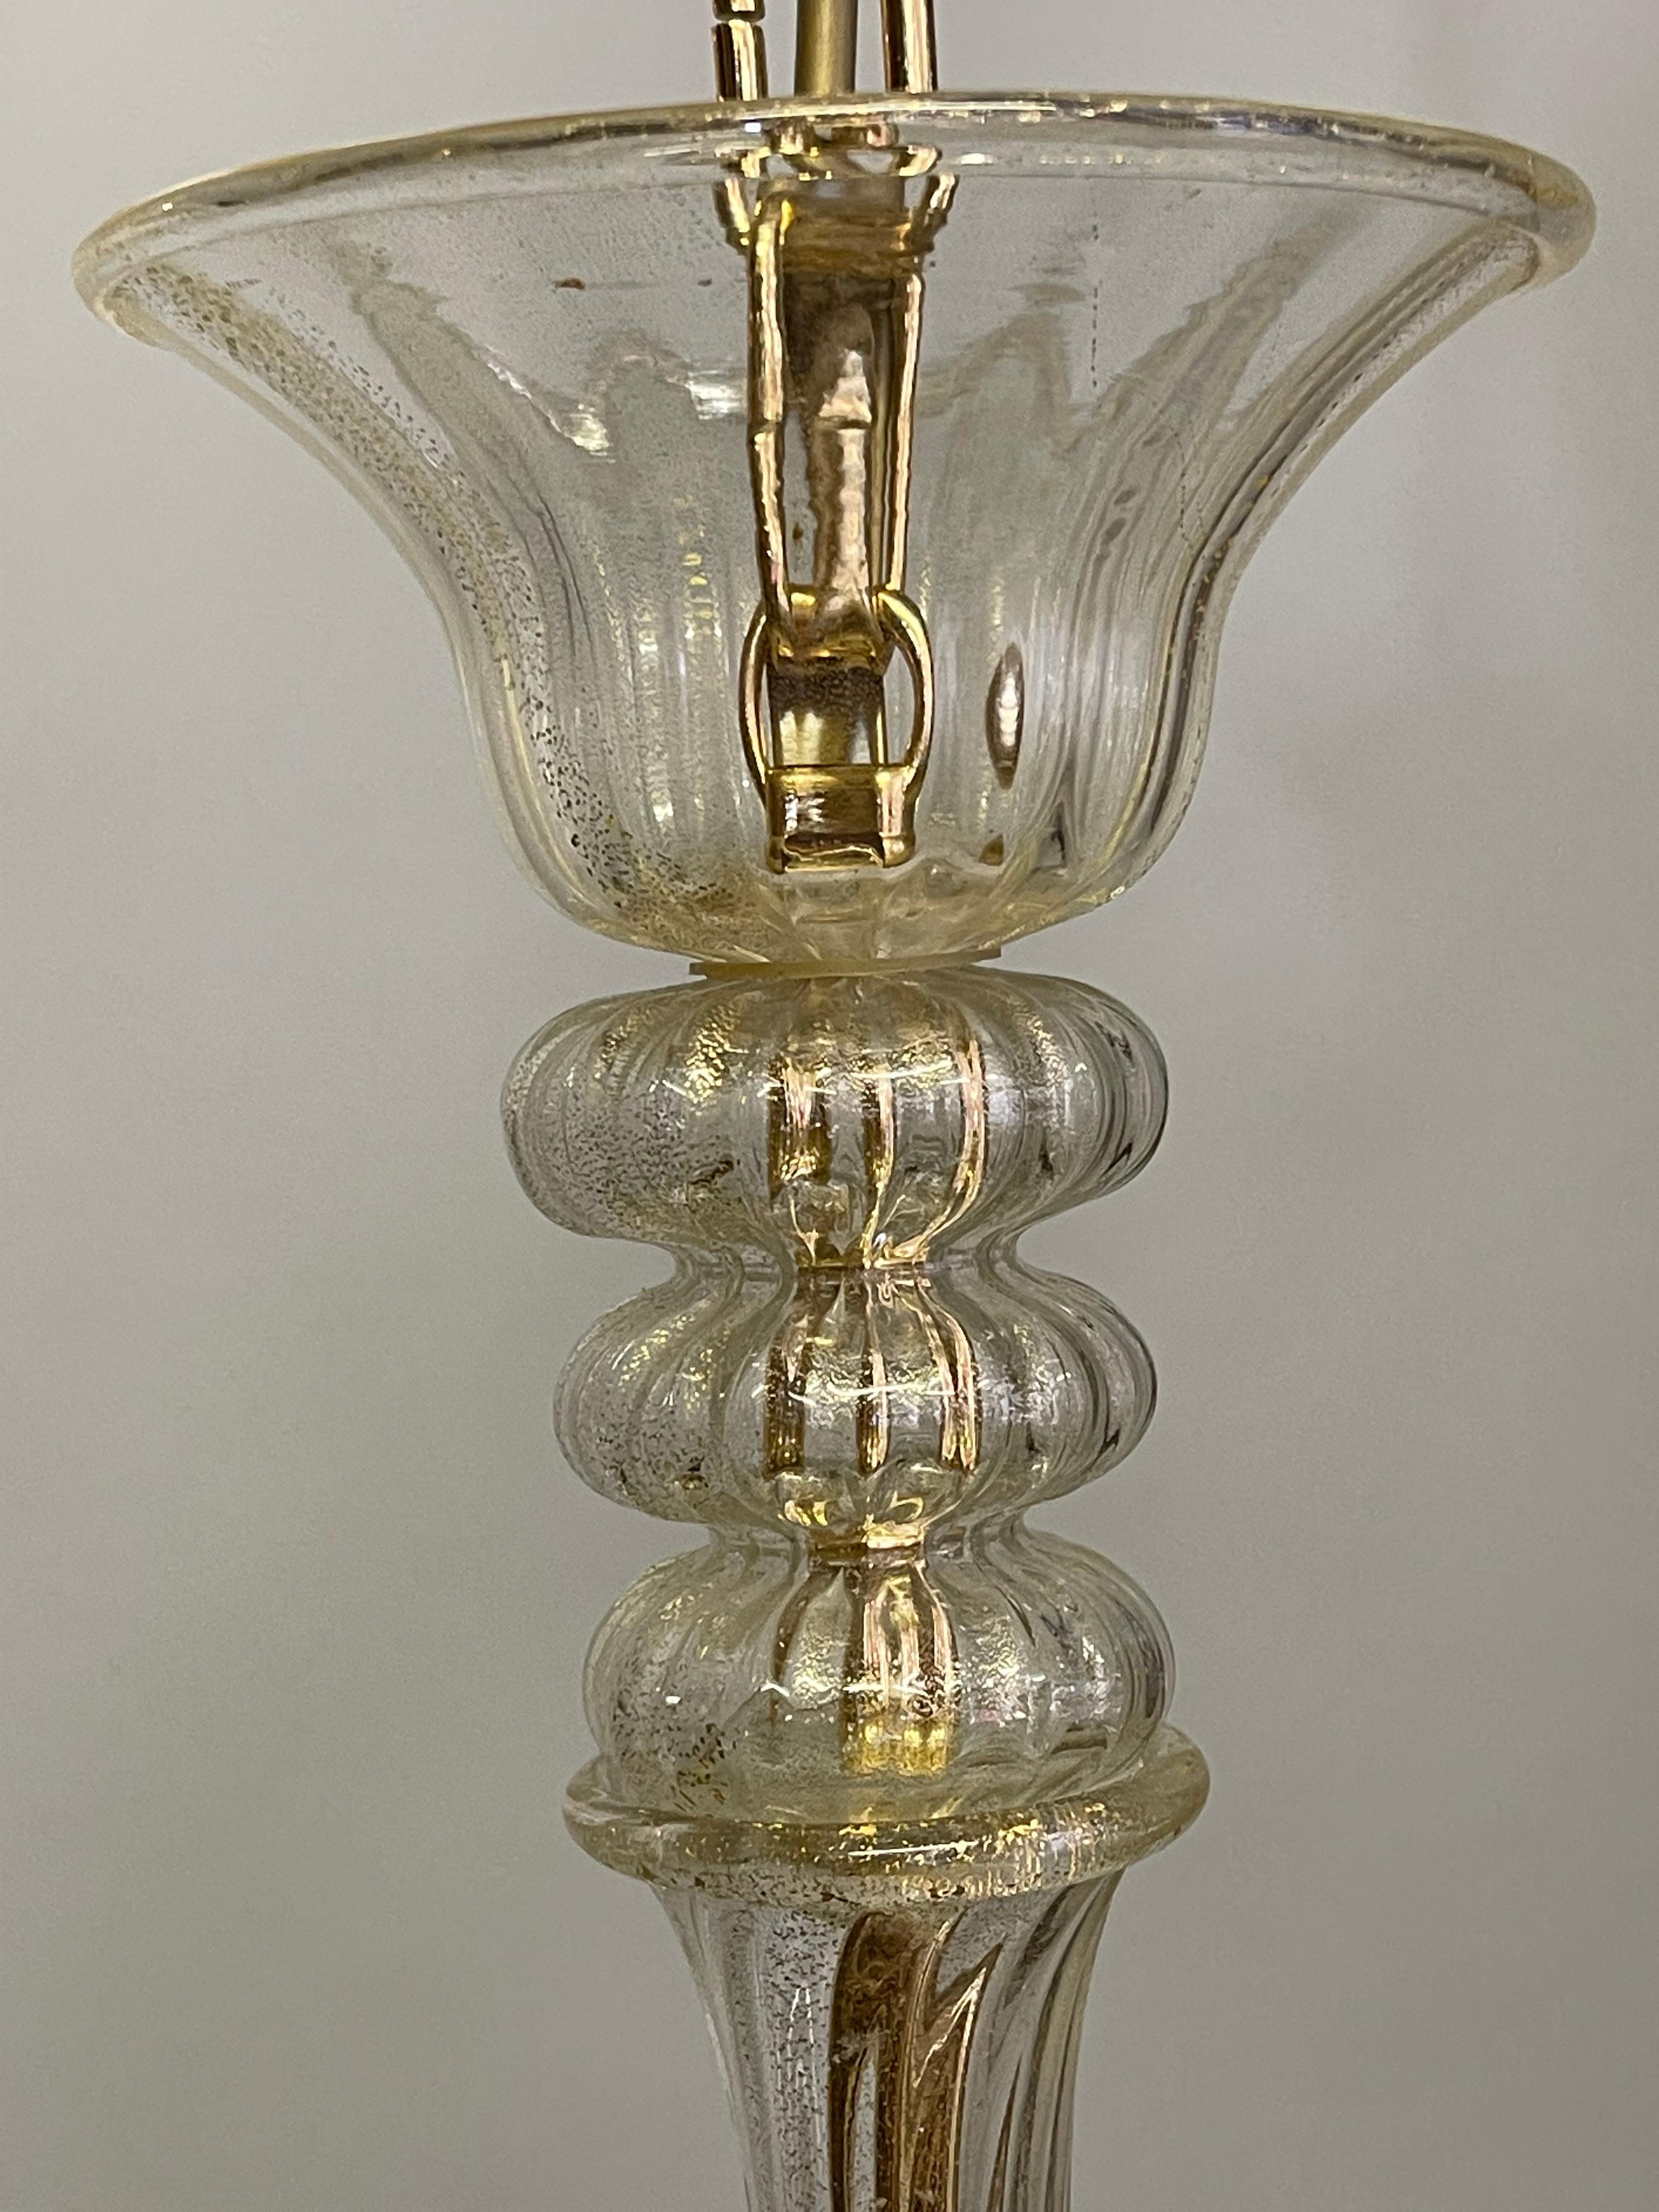 Large Barovier Toso Gold Dusted Murano Glass Chandelier, circa 1960s For Sale 3